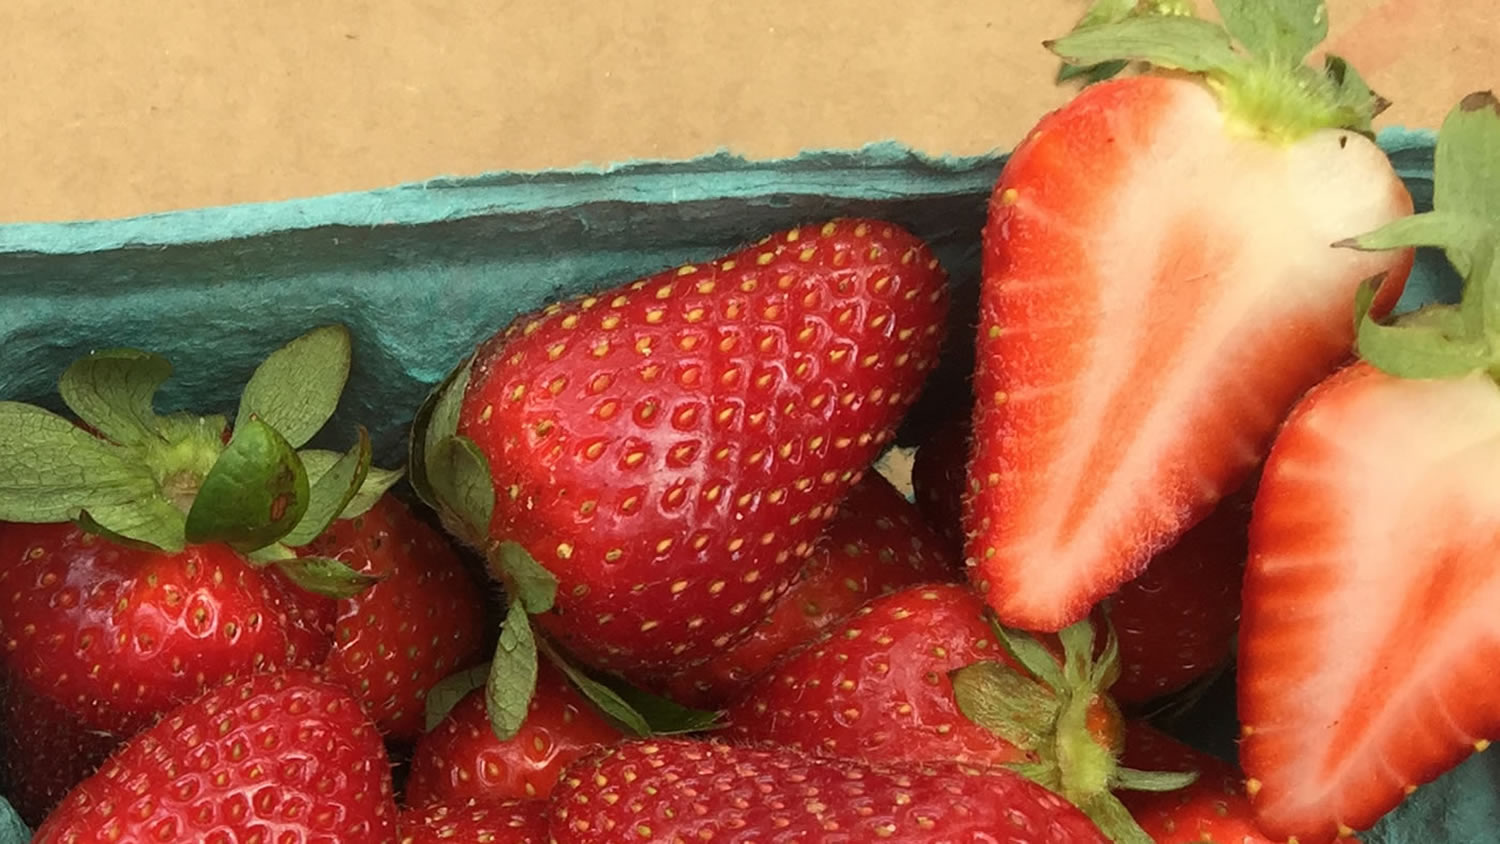 Strawberries in a crate